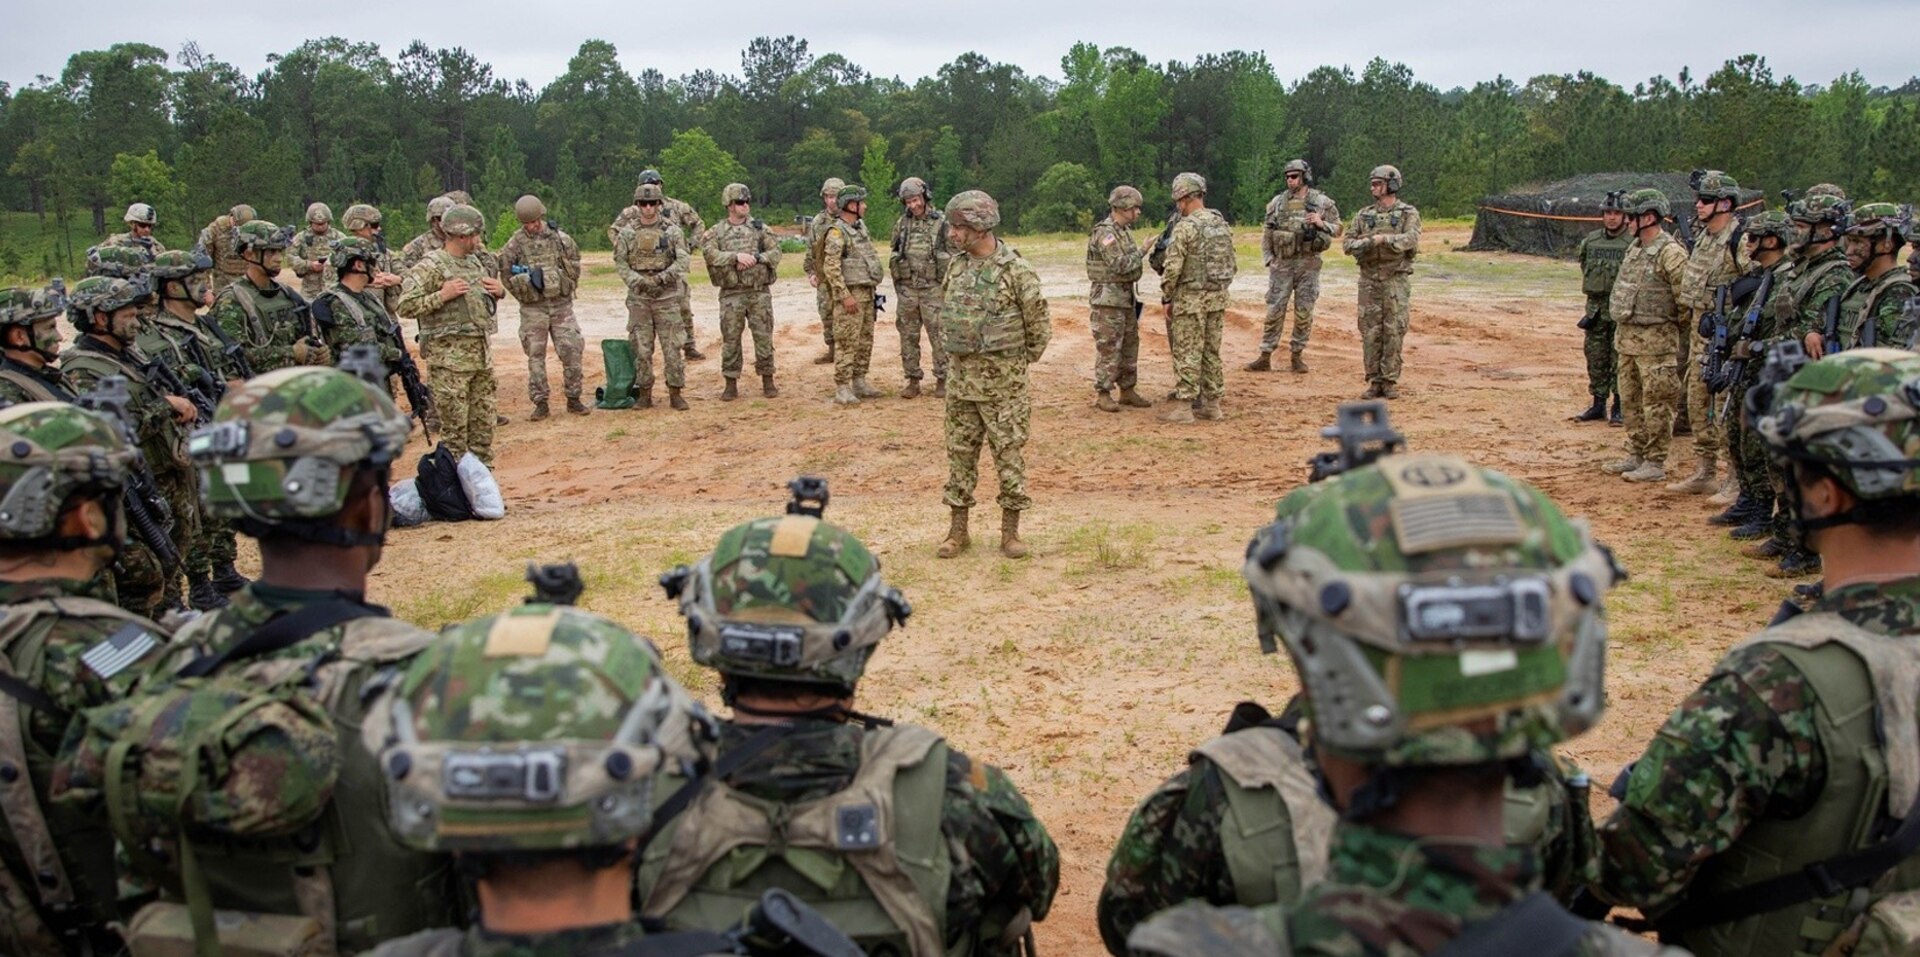 Colombian Army Maj. Gen. Alvaro Vicente Perez Duran, Deputy Commander of the Colombian Army, adresses a group of Colombian and U.S. Soldiers after they completed their live fire training lane during their Joint Readiness Training Center rotation at Fort Polk, La. on May 5, 2023.